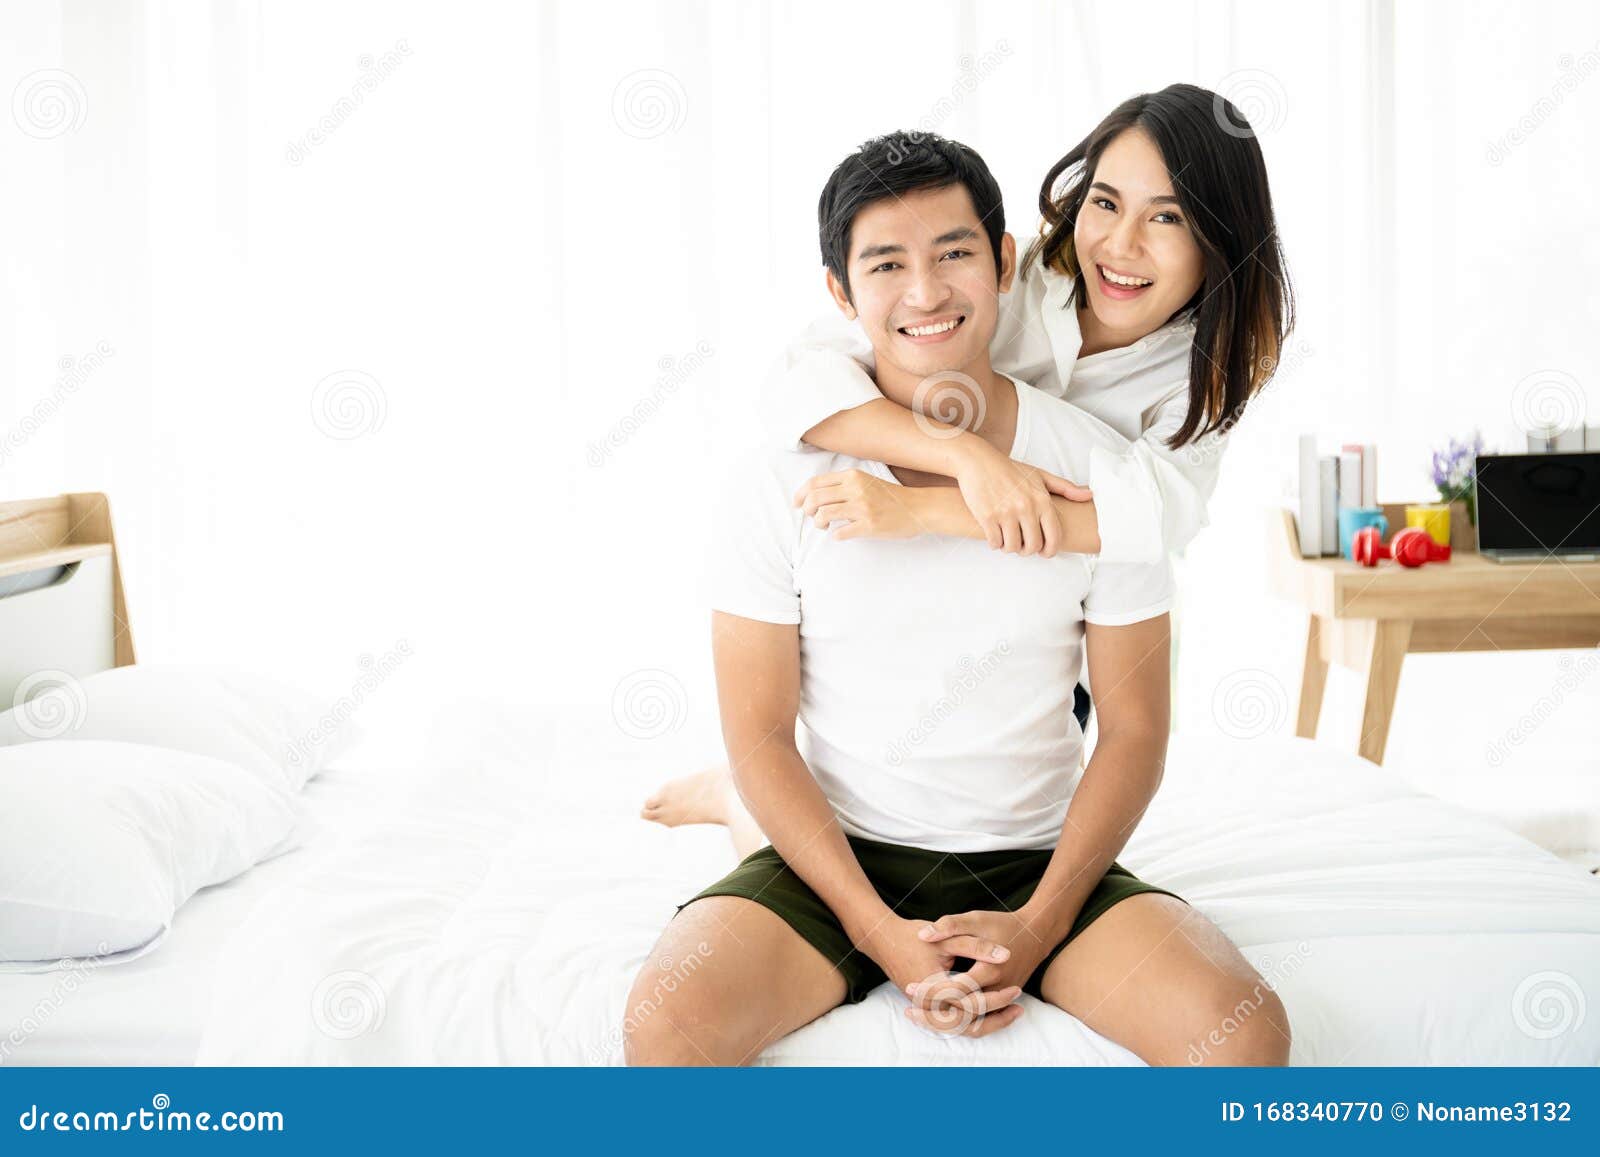 Lovely Asian Young Couple in Bedroom Stock Photo pic